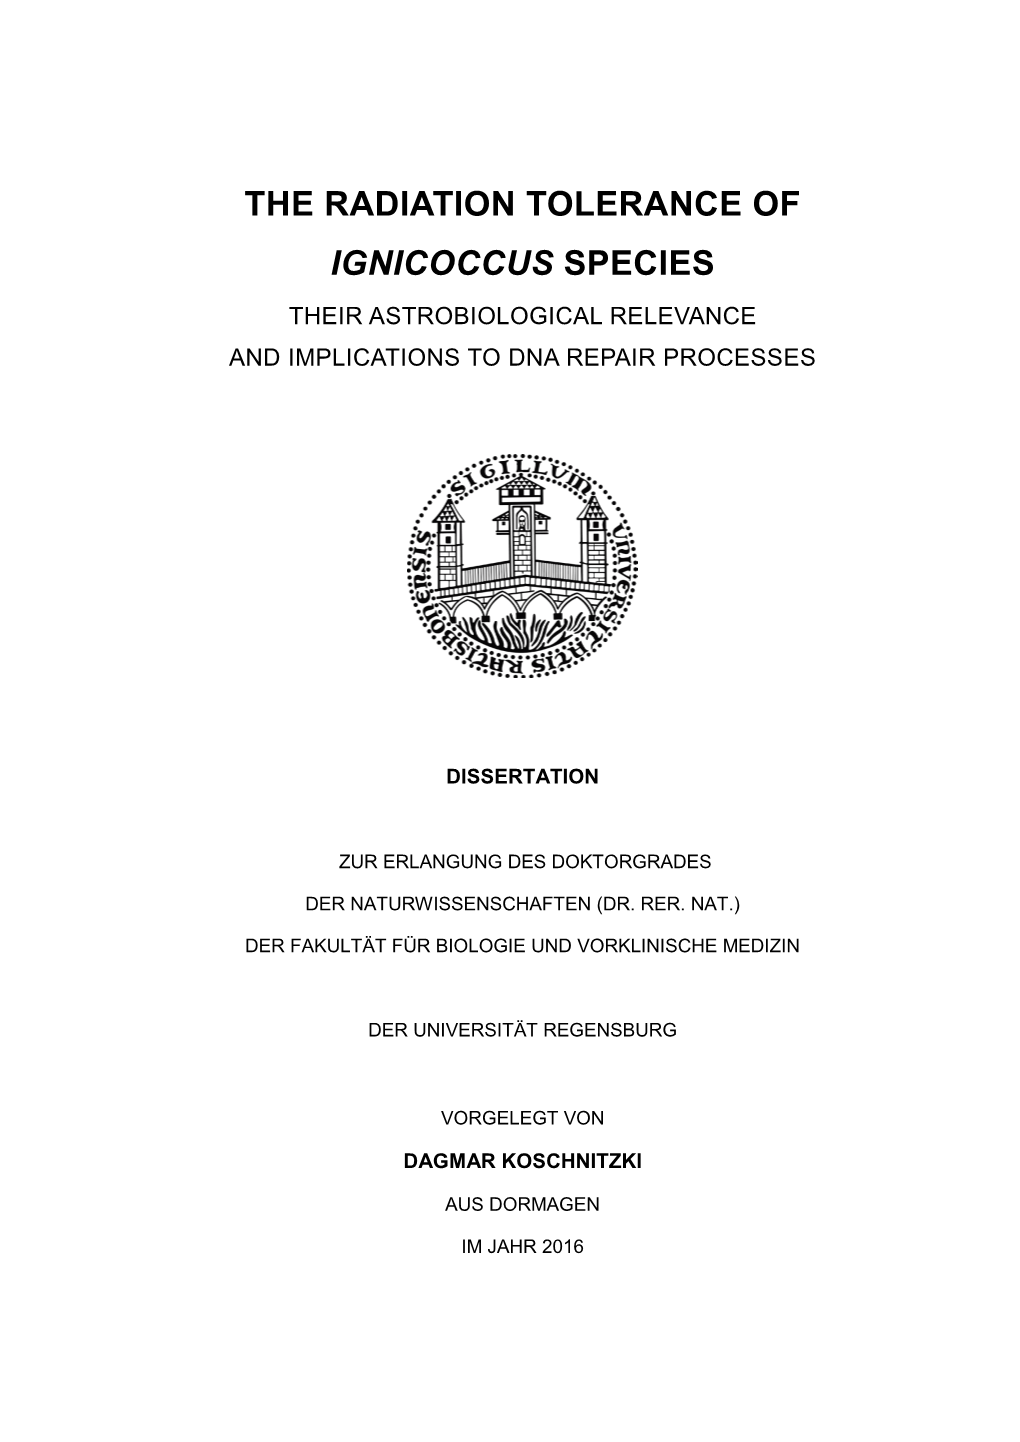 The Radiation Tolerance of Ignicoccus Species Their Astrobiological Relevance and Implications to Dna Repair Processes